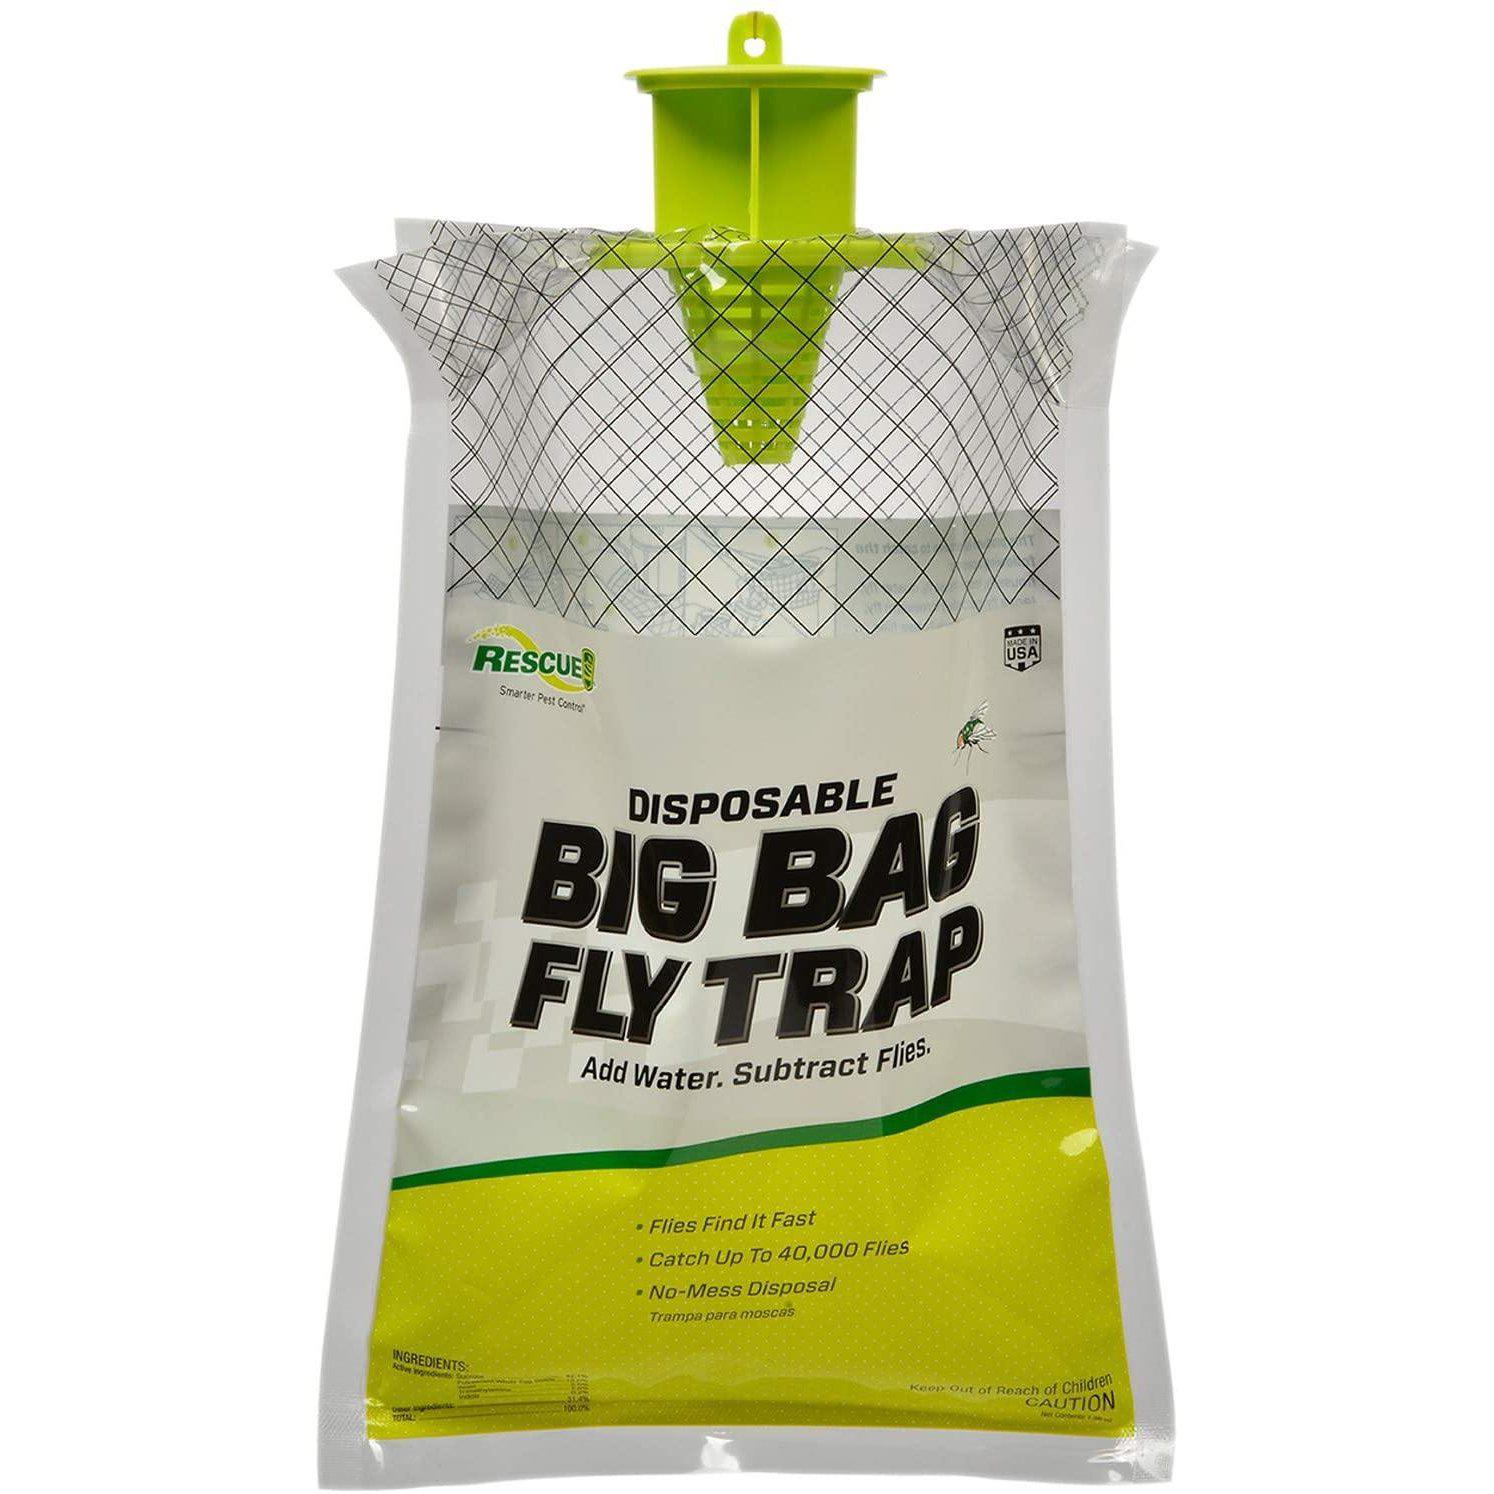 https://cdn.shopify.com/s/files/1/2485/1572/products/rescue-disposable-big-bag-fly-trap-824338.jpg?v=1694541507&width=1494